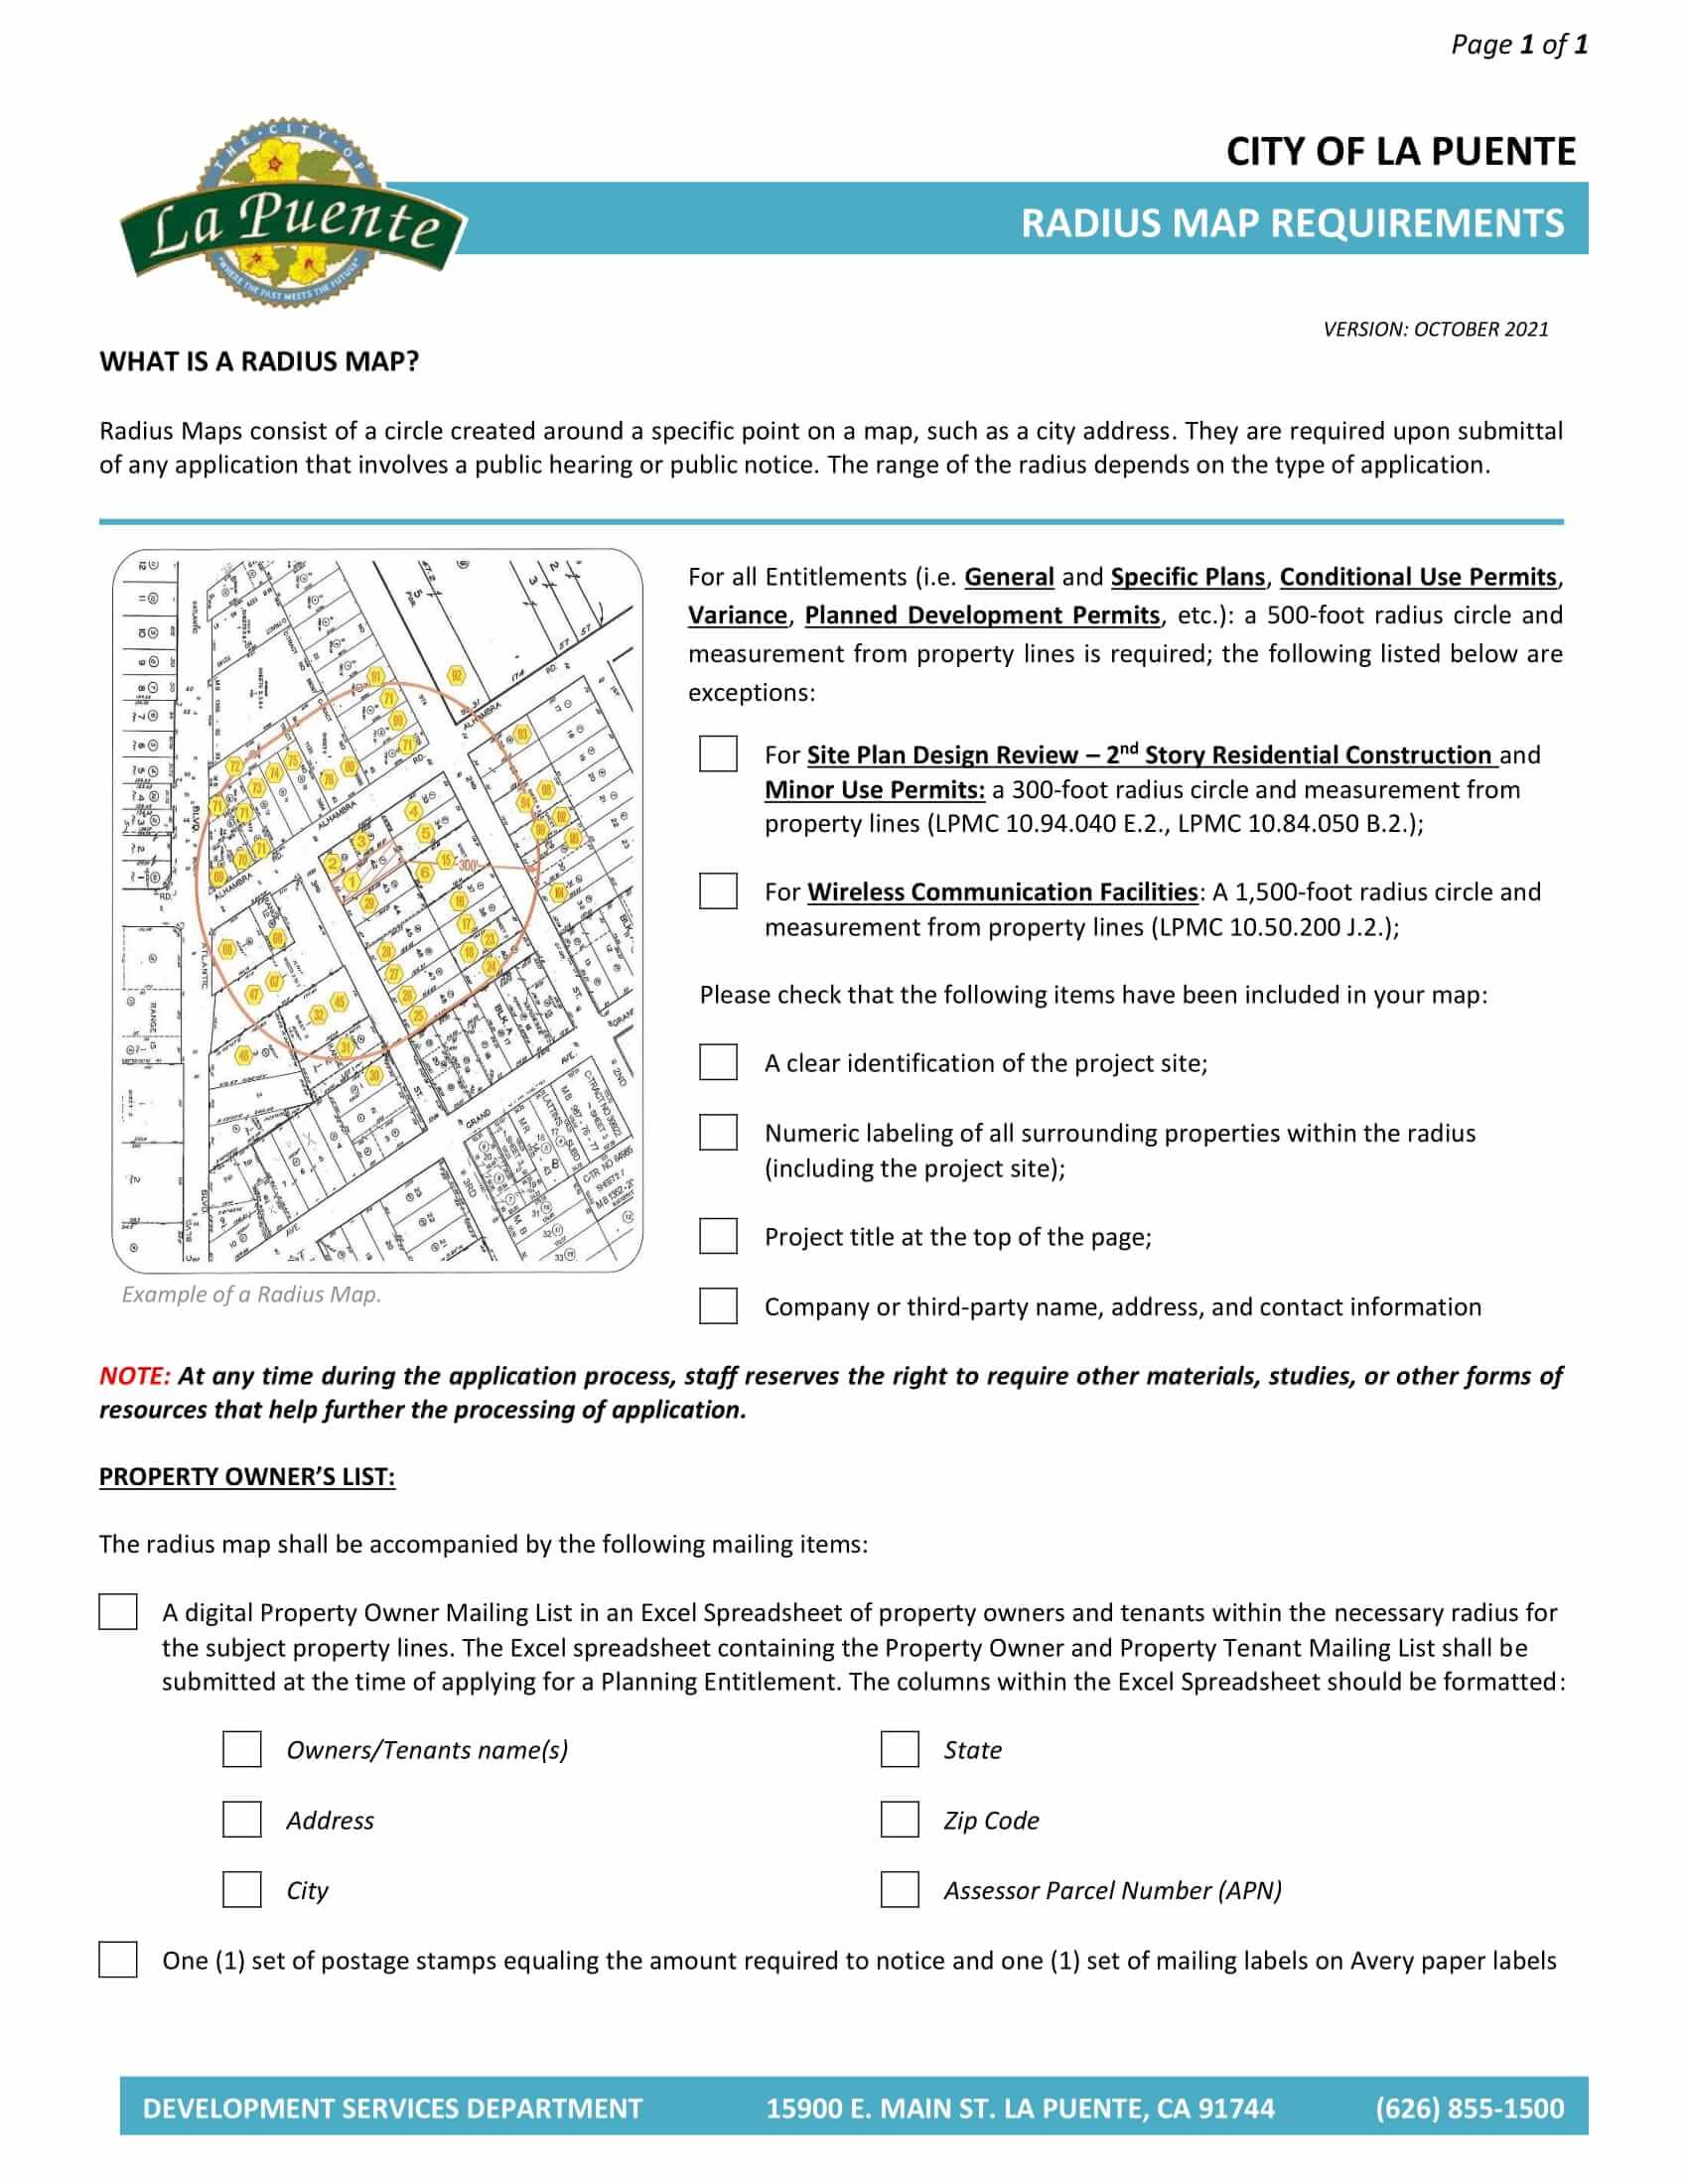 CITY OF LA PUENTE RADIUS MAP REQUIREMENTS. Property Owner's List.A digital Property Owner Mailing List in an Excel Spreadsheet.